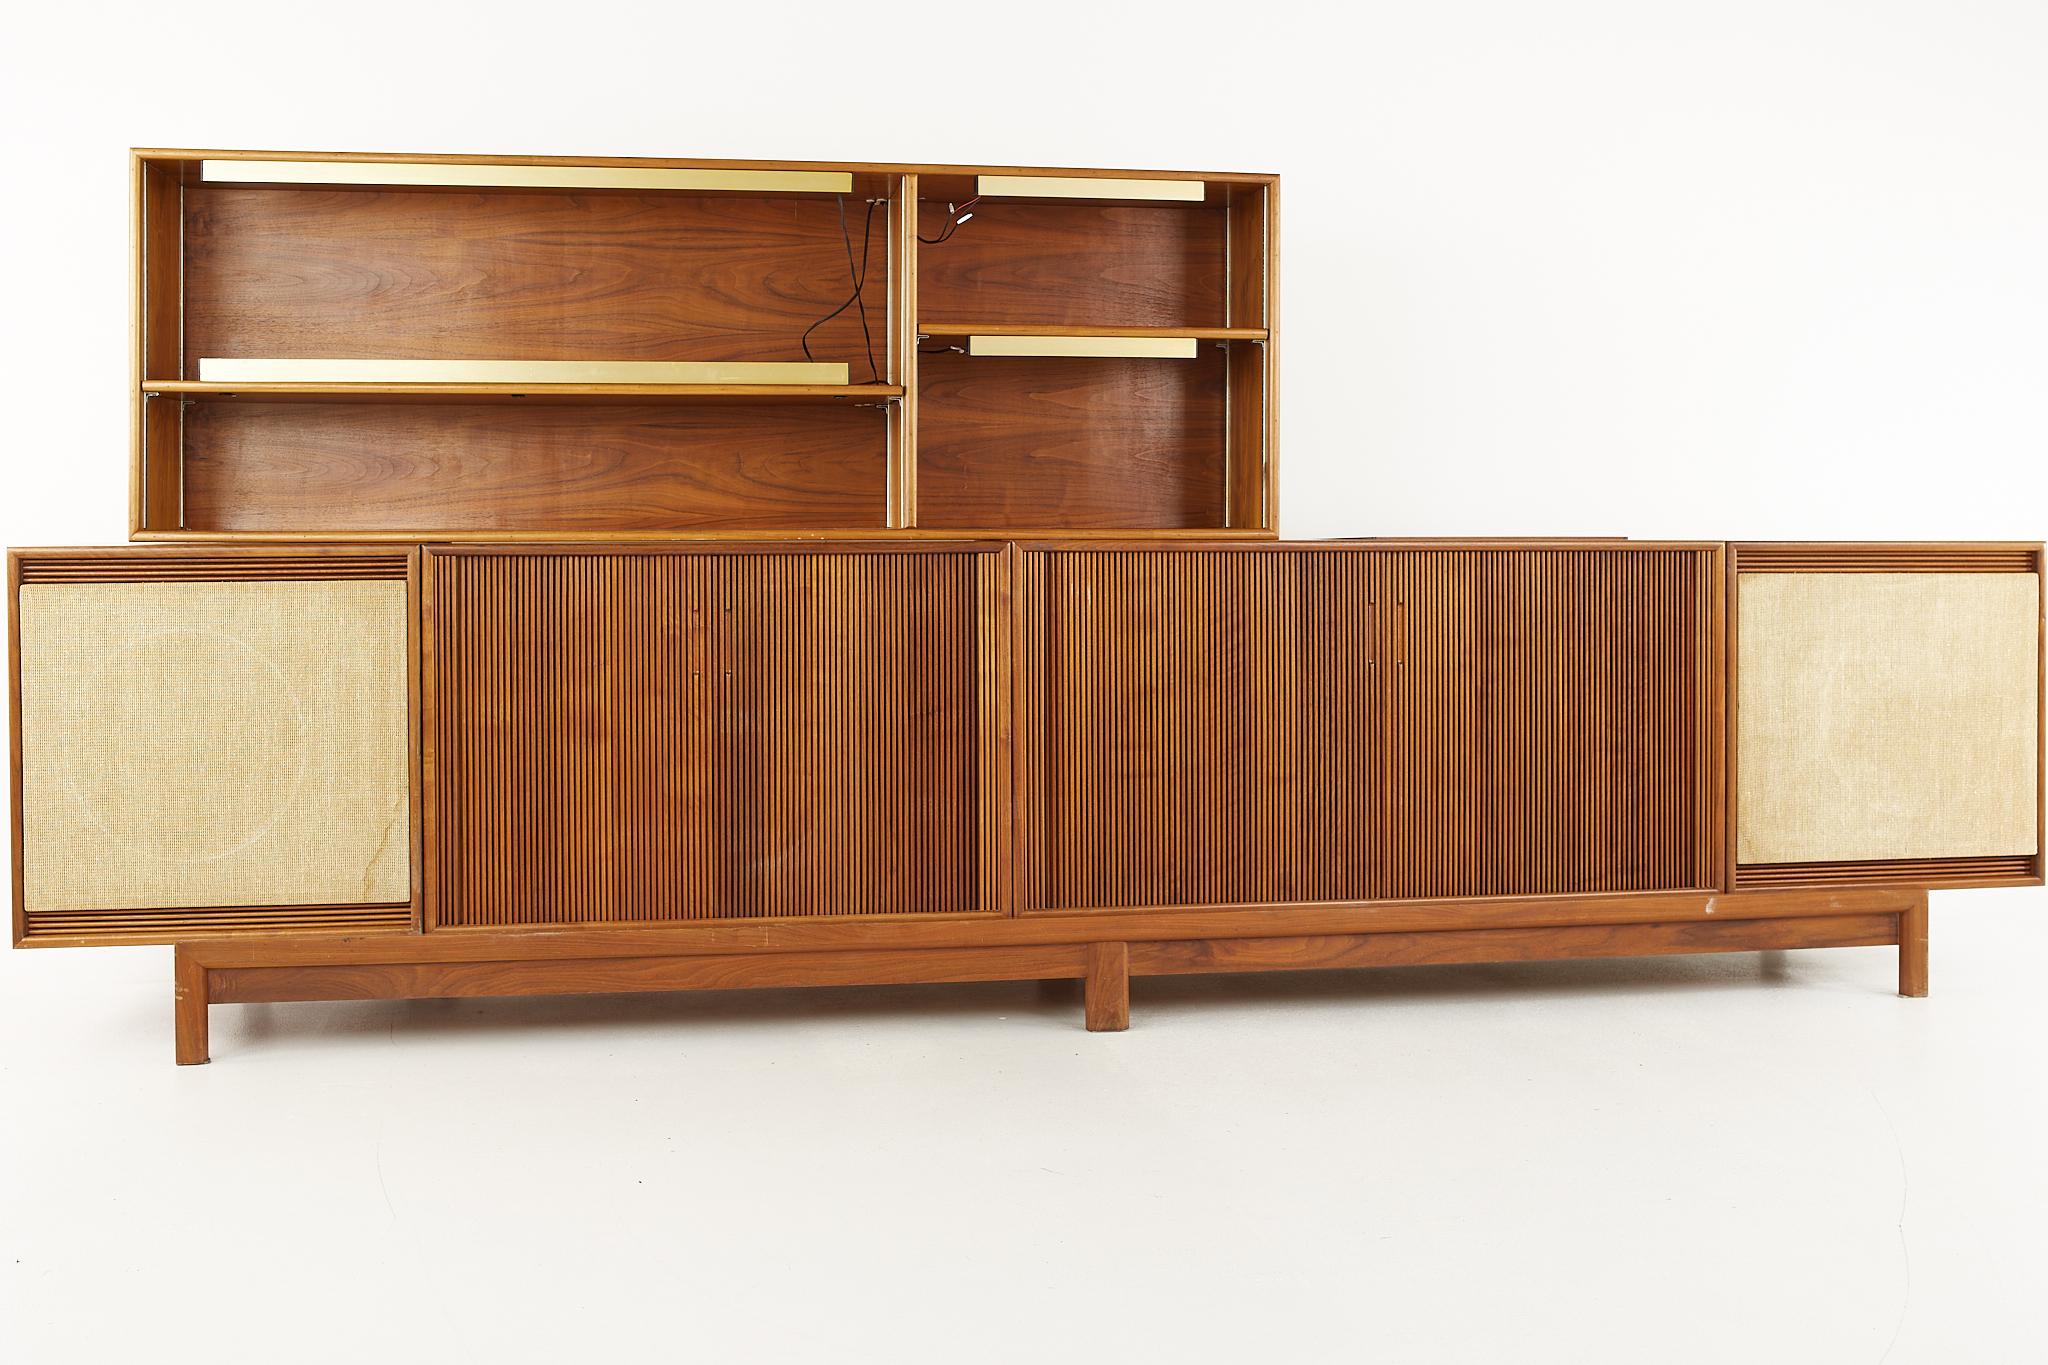 Barzilay mid century modular tambour door stereo console and bar

The console measures: 131 wide x 18 deep x 55 inches high

All pieces of furniture can be had in what we call restored vintage condition. That means the piece is restored upon